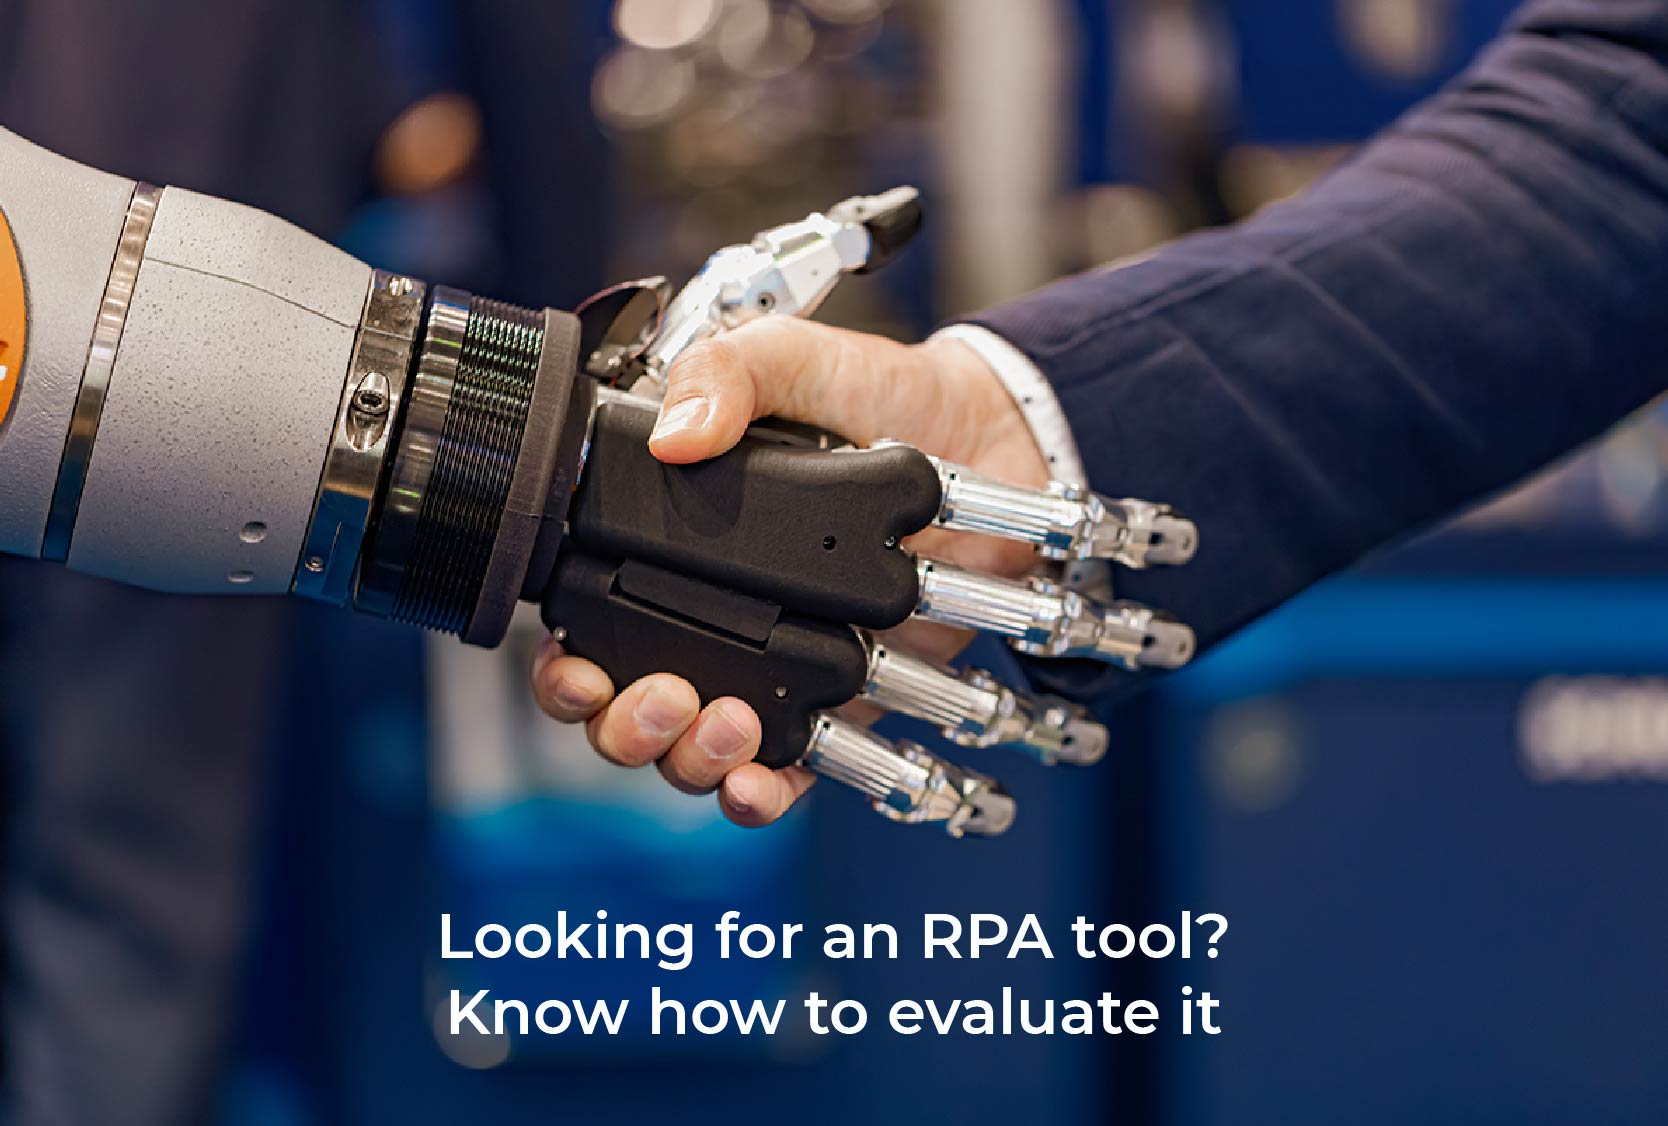 Looking for an RPA tool? Know how to evaluate it